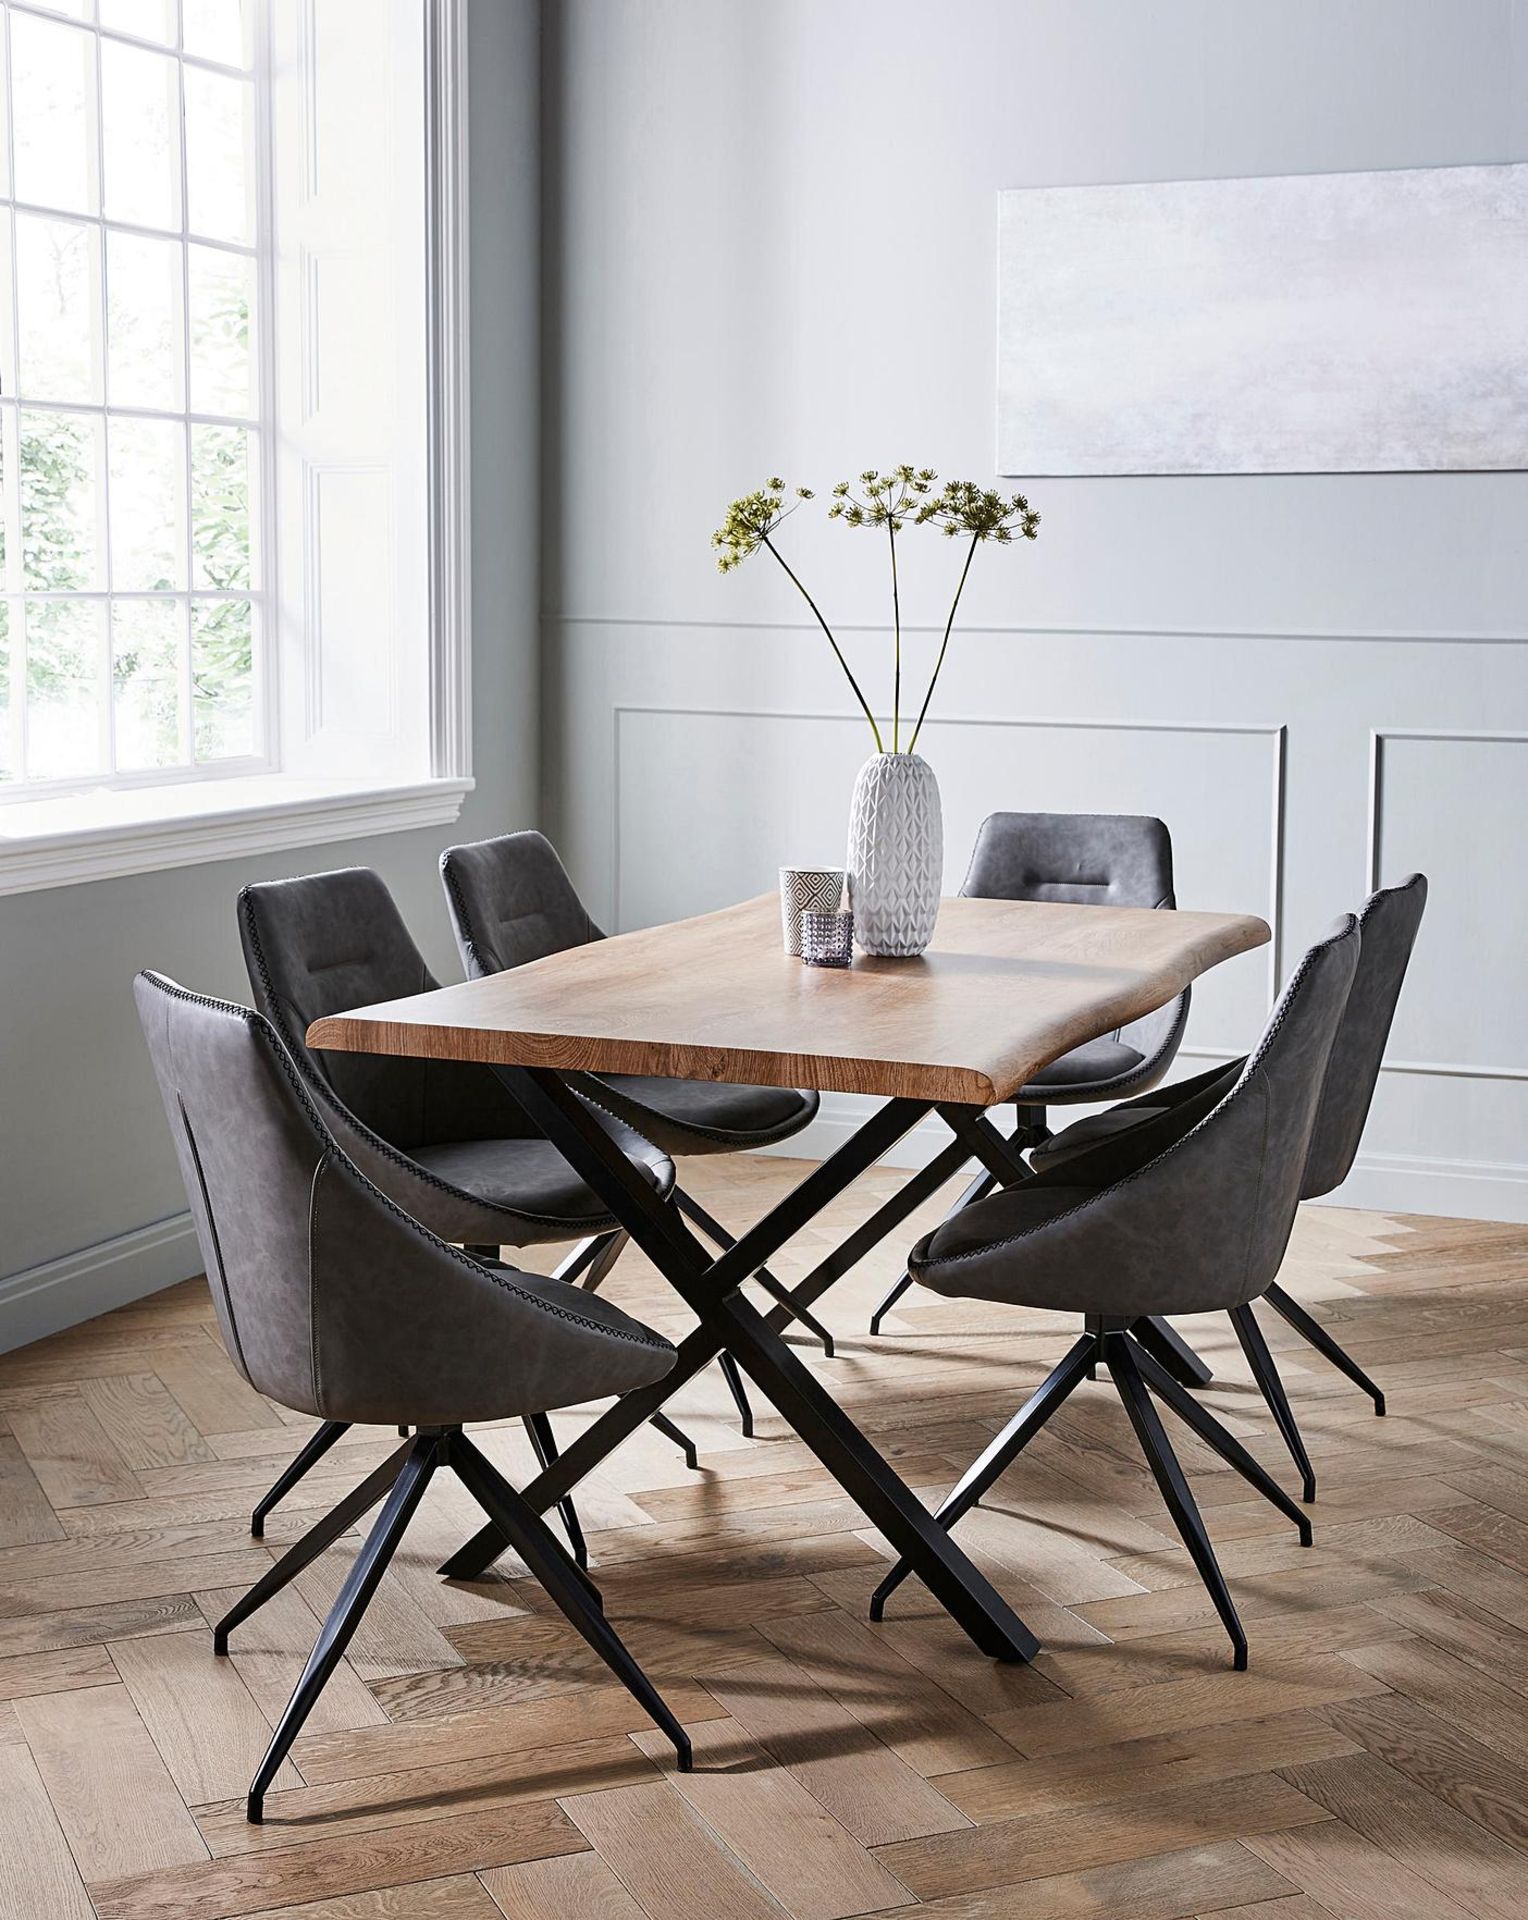 BRAND NEW KARTER Large Dining Table and 6 Chairs - GREY/OAK. RRP £1399 EACH. The Karter Large Dining